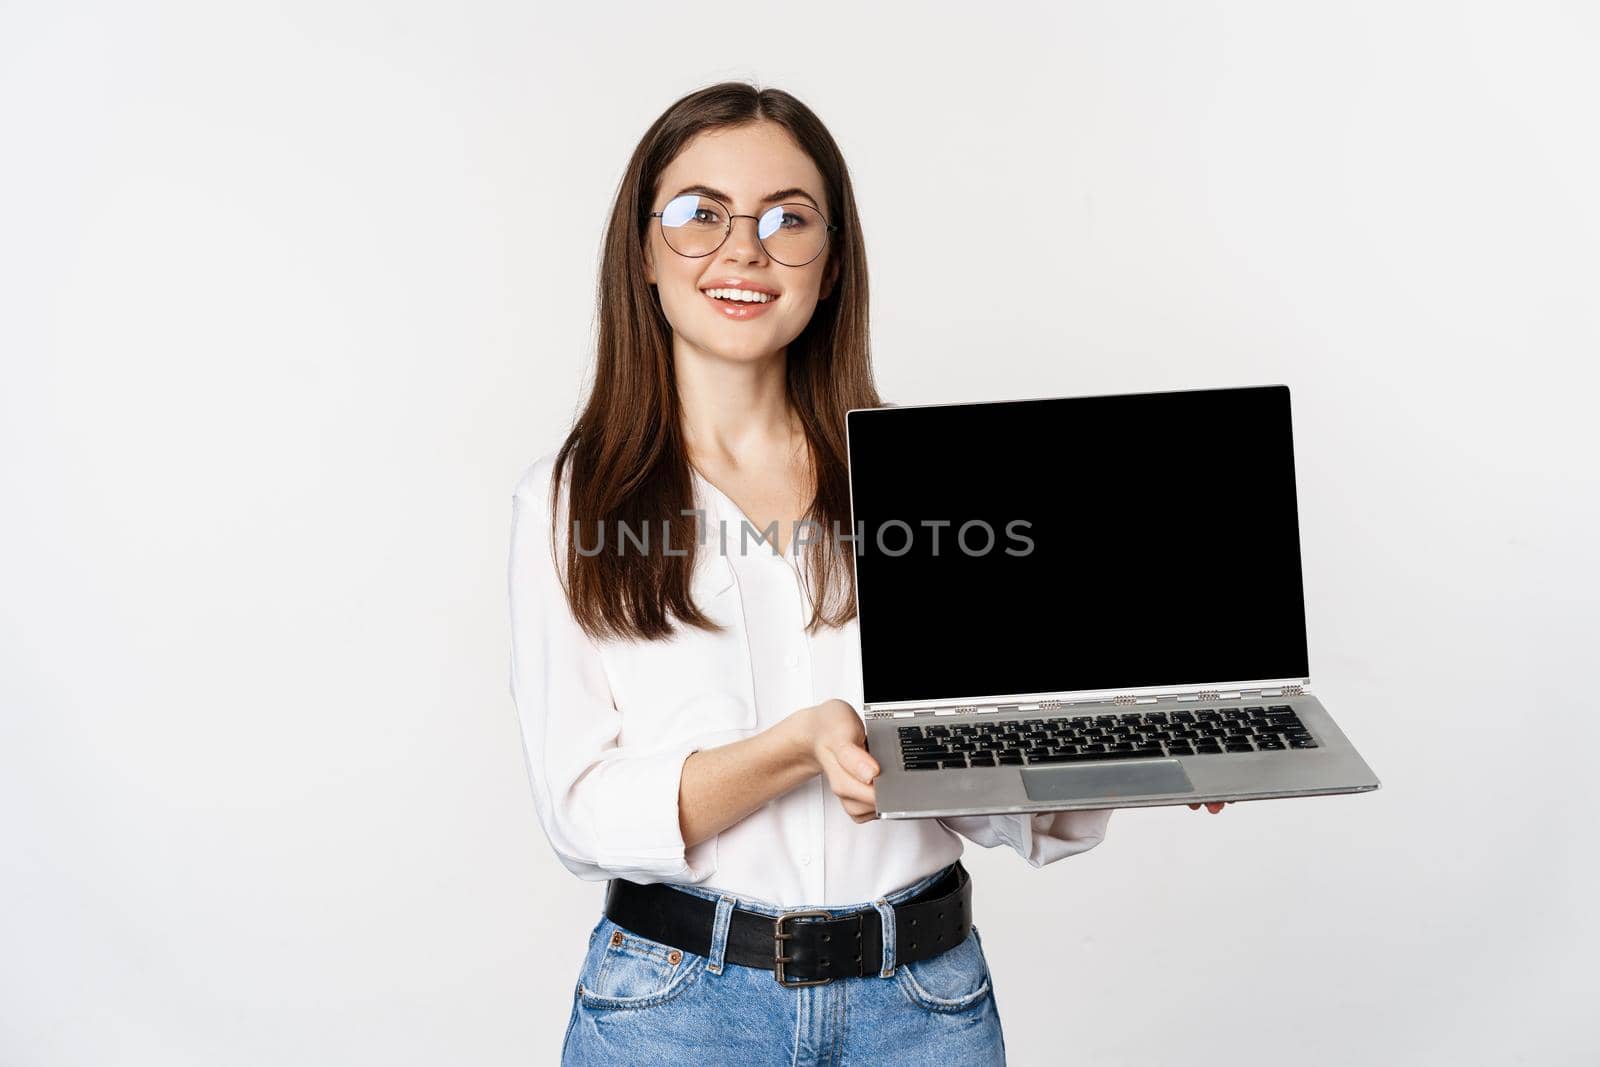 Young woman in glasses showing laptop screen, demonstrating promo on computer, website or store, standing over white background.